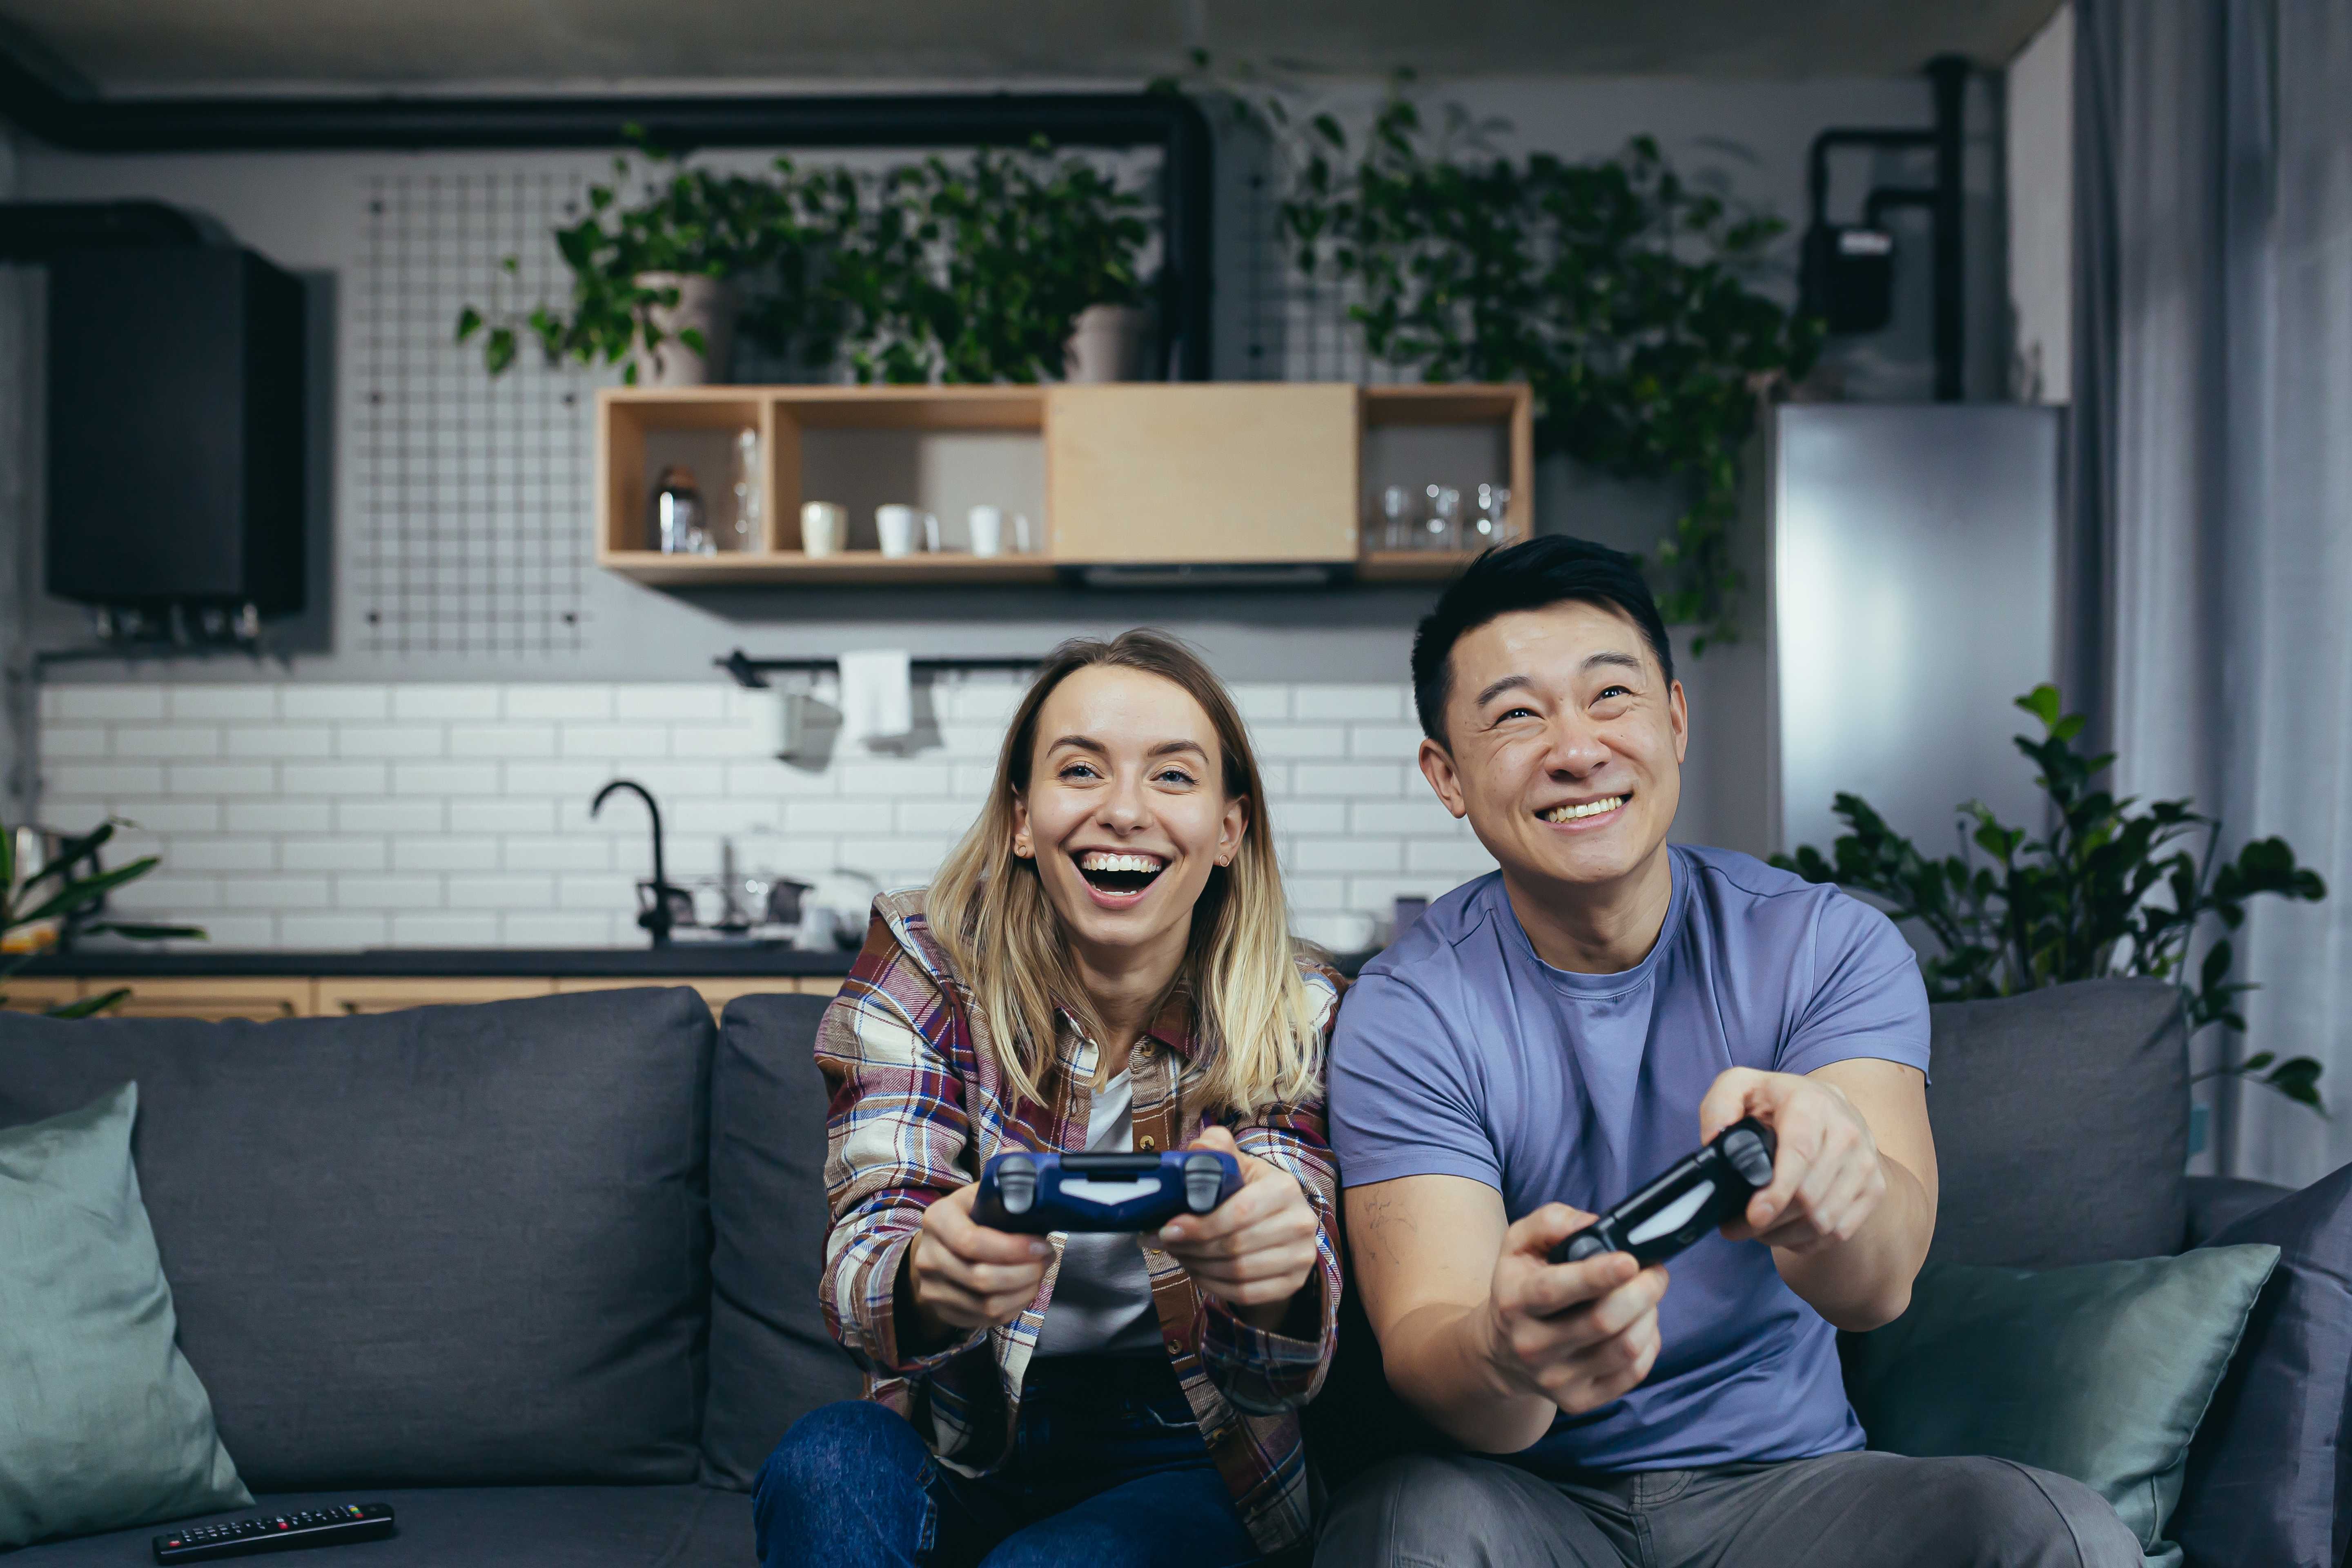 A loving girlfriend plays the video game she bought for her boyfriend’s birthday with him.